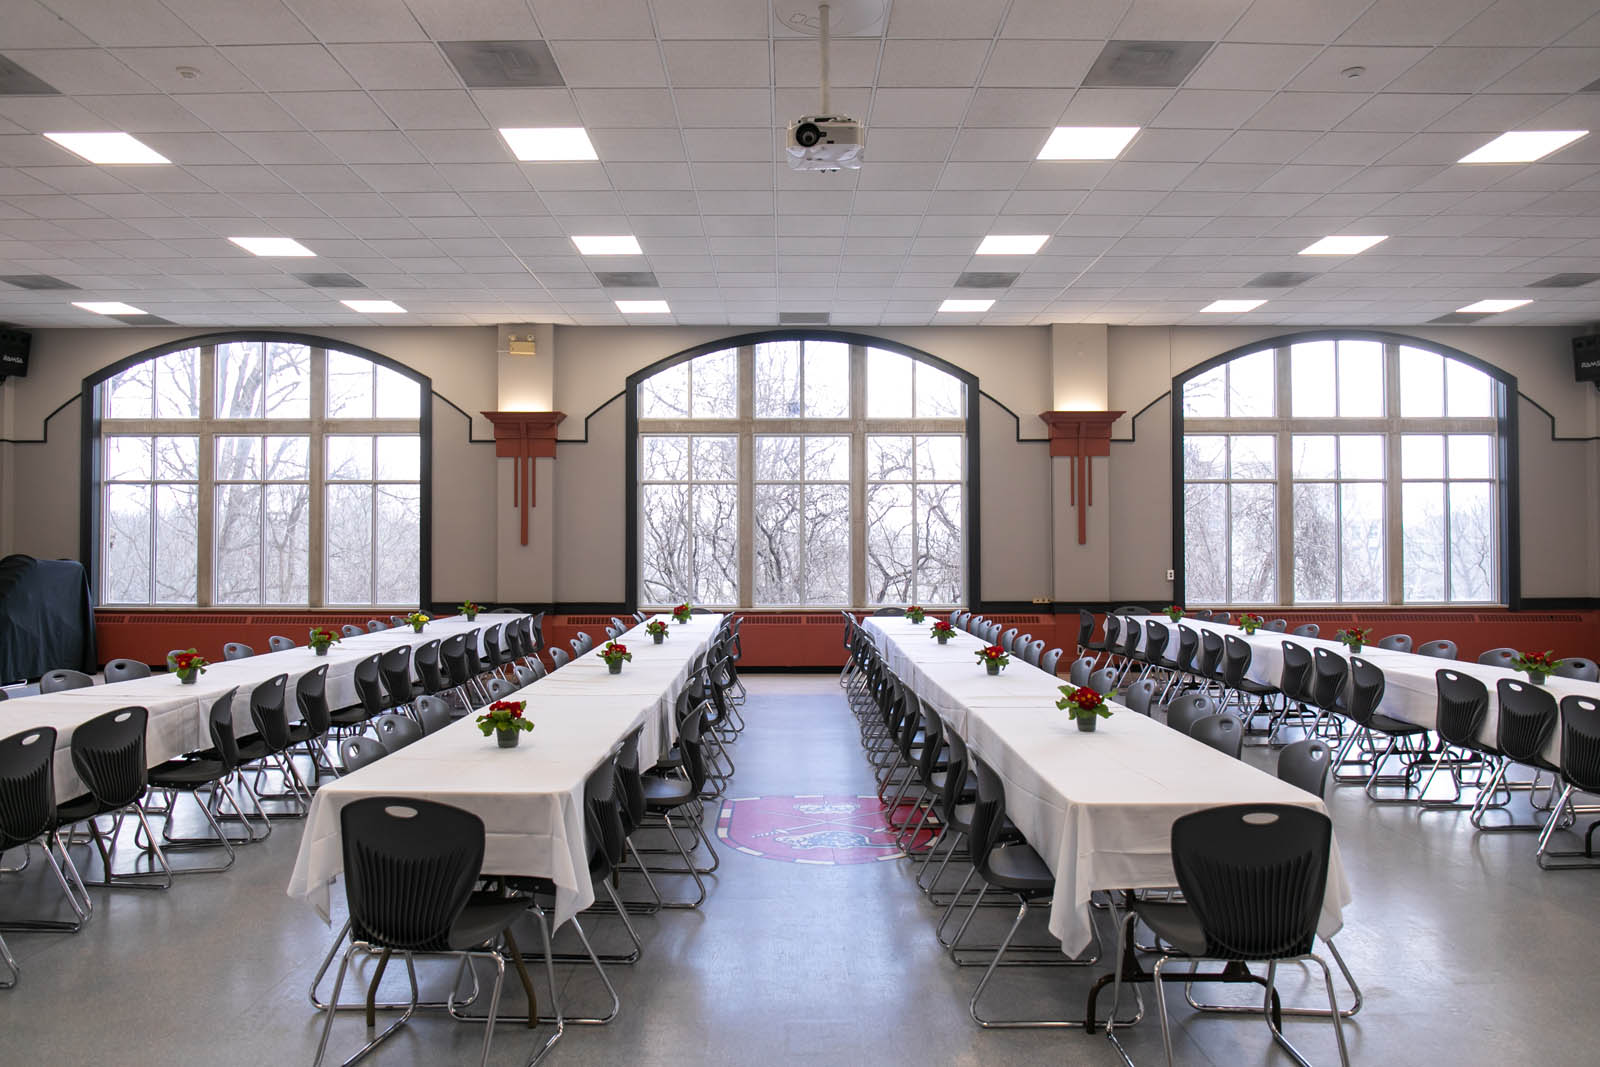 A large room with three bay windows at the back set with four long rows of tables and banquet seating for 120 people